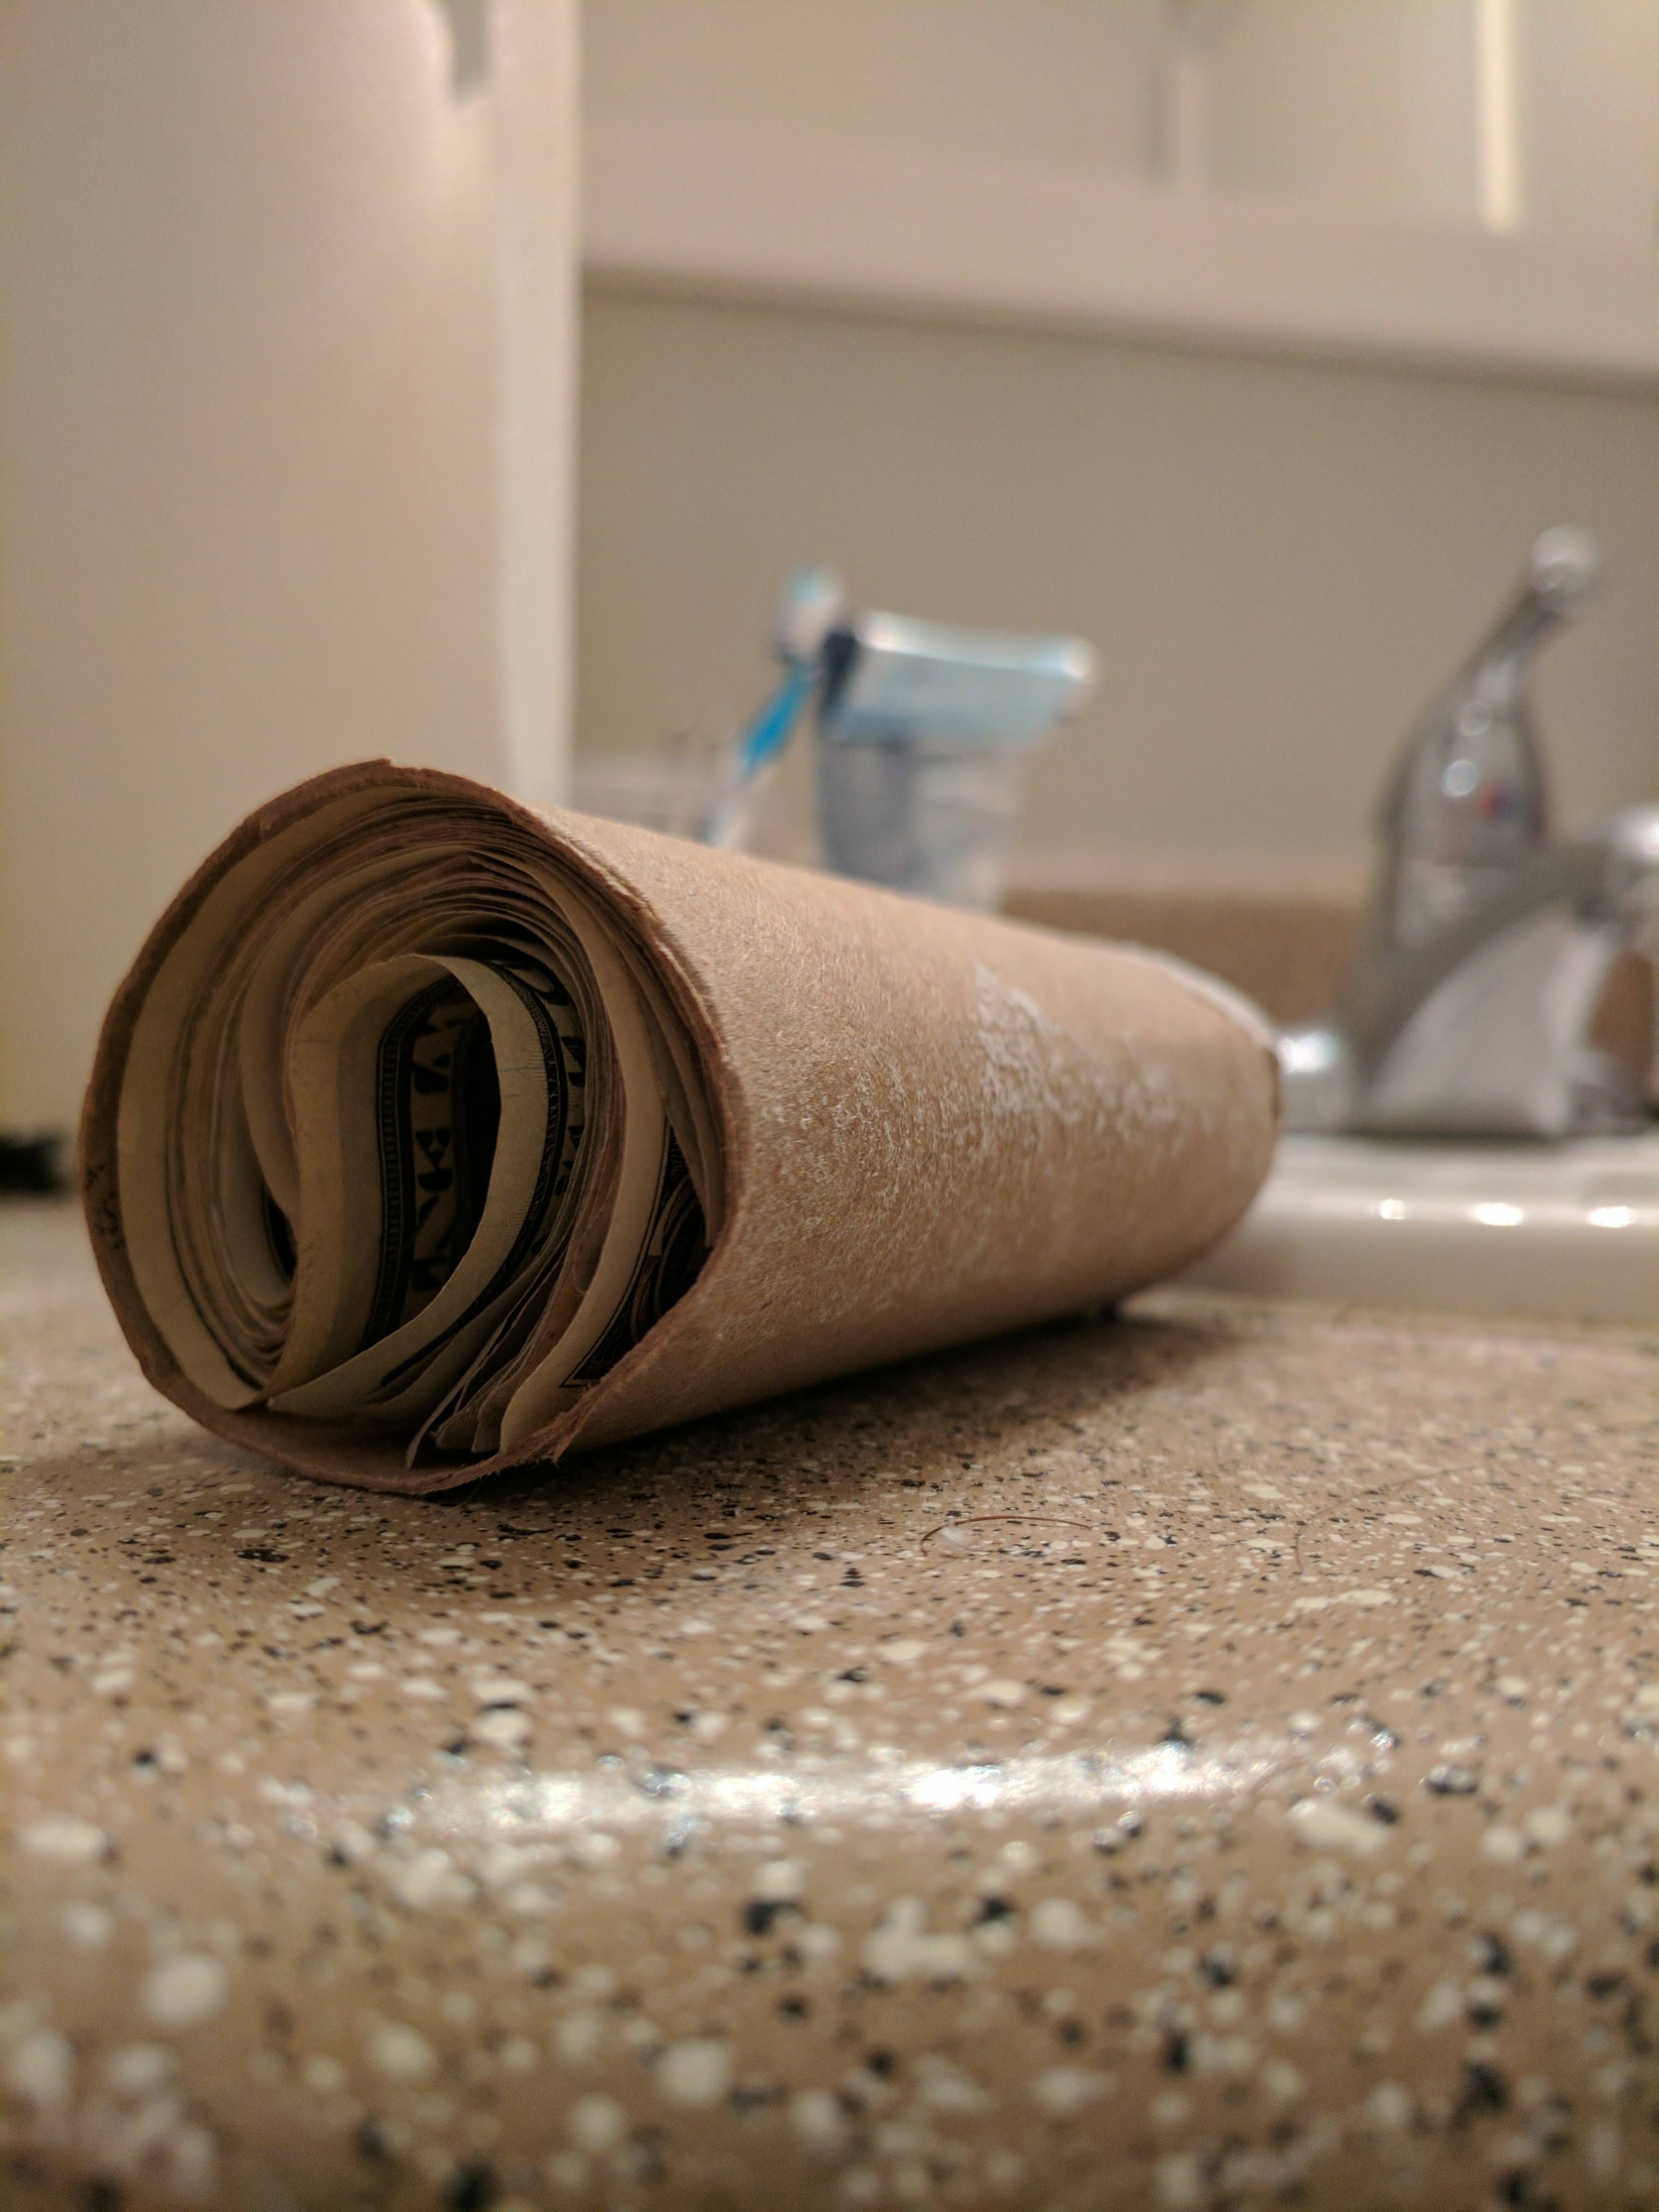 My roommate called making sure I didn't throw out his "empty toilet roll of cash" he left in the bathroom. I have so many questions.